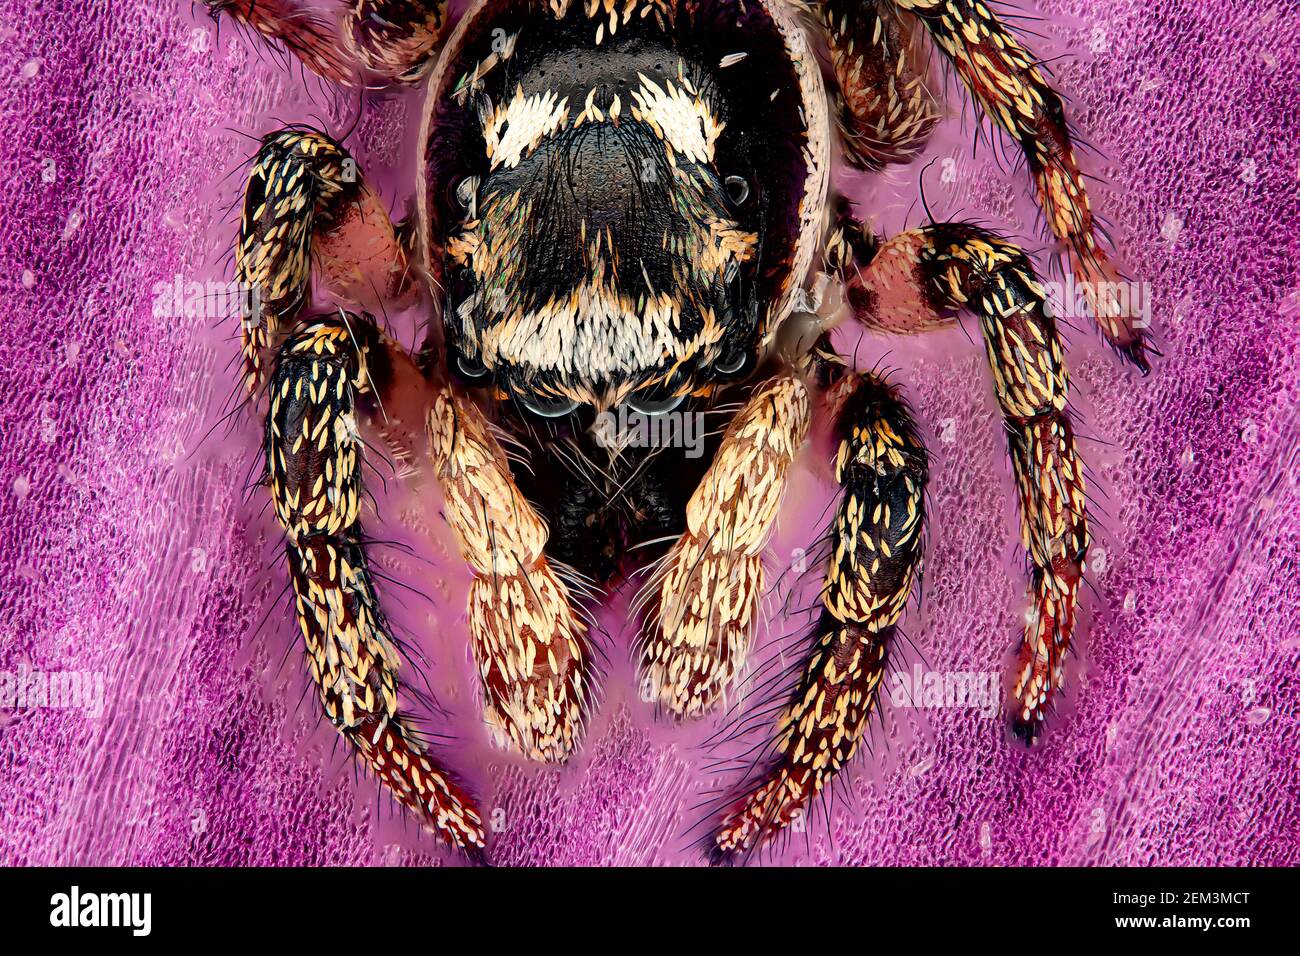 zebra jumper (Salticus scenicus), portrait of a zebra jumper, macro image, magnification x20 related to 35 mm, Germany Stock Photo